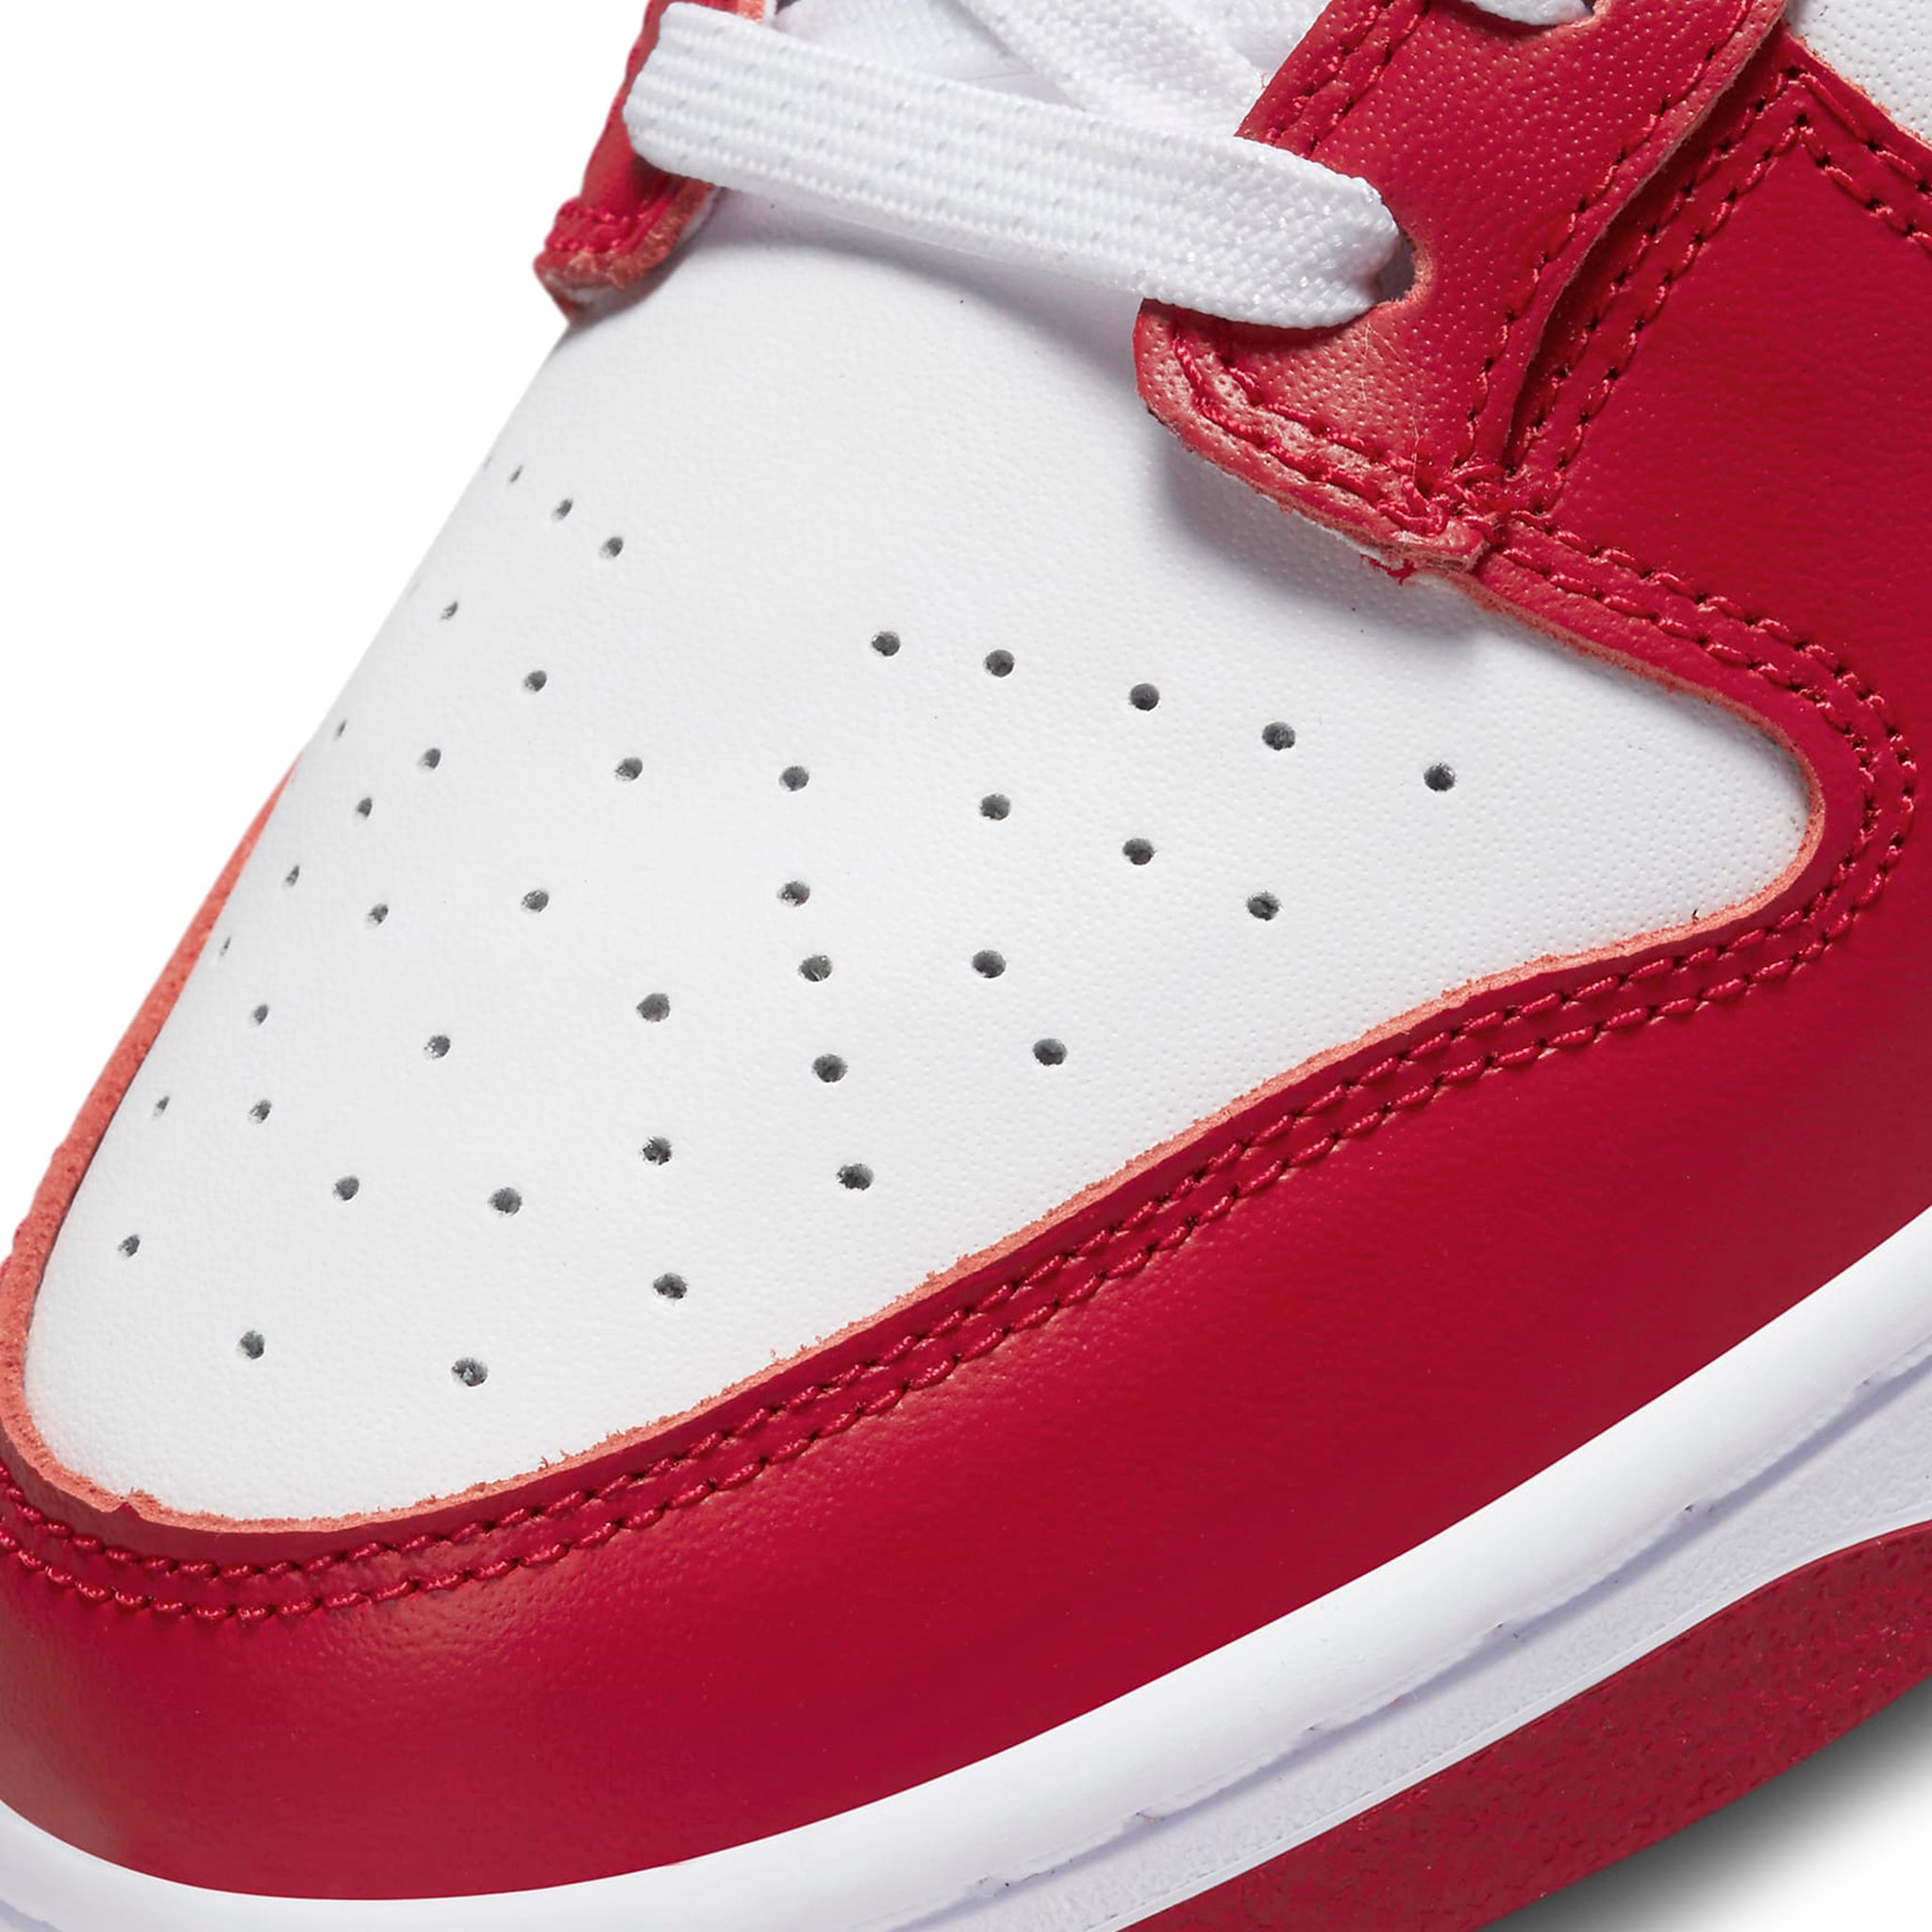 Toe box view of Nike Dunk Low USC DD1391-602